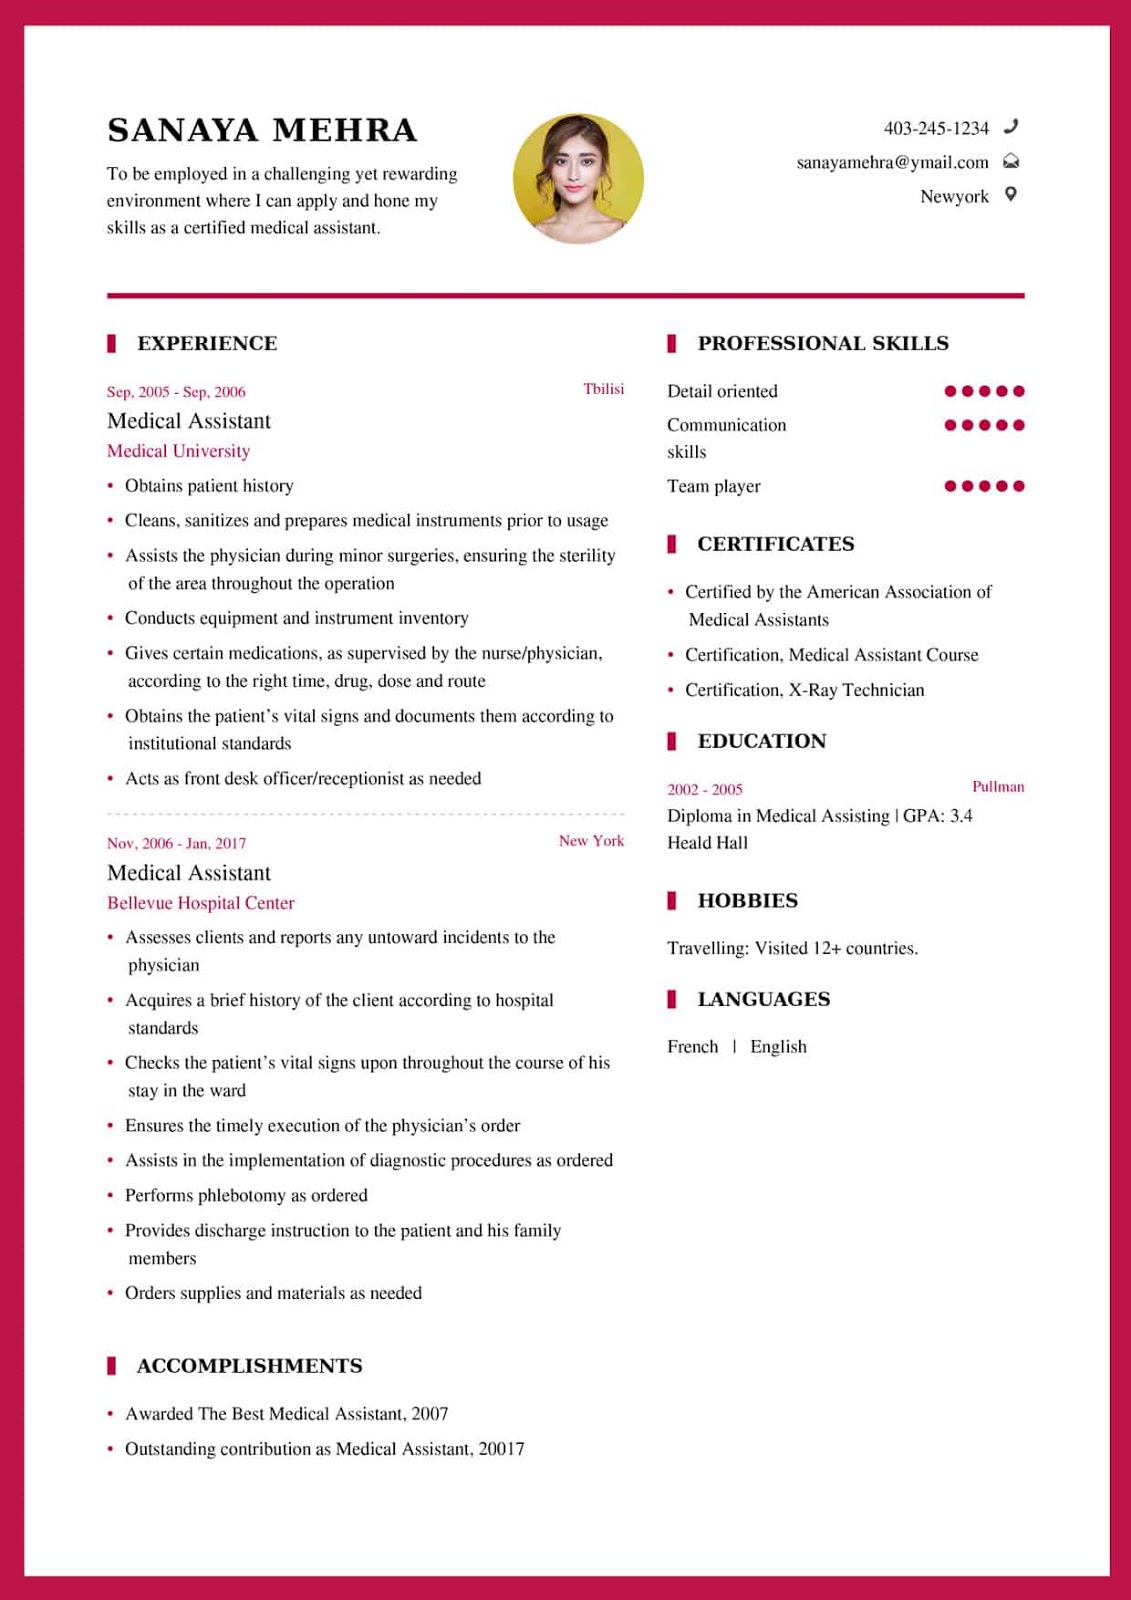 Medical Assistant Resume Examples 2019, medical assistant resume examples, medical assistant resume examples 2018, medical assistant resume examples entry level, medical assistant resume examples no experience, medical assistant resume examples 2019, medical assistant resume examples with experience, medical assistant resume examples skills,